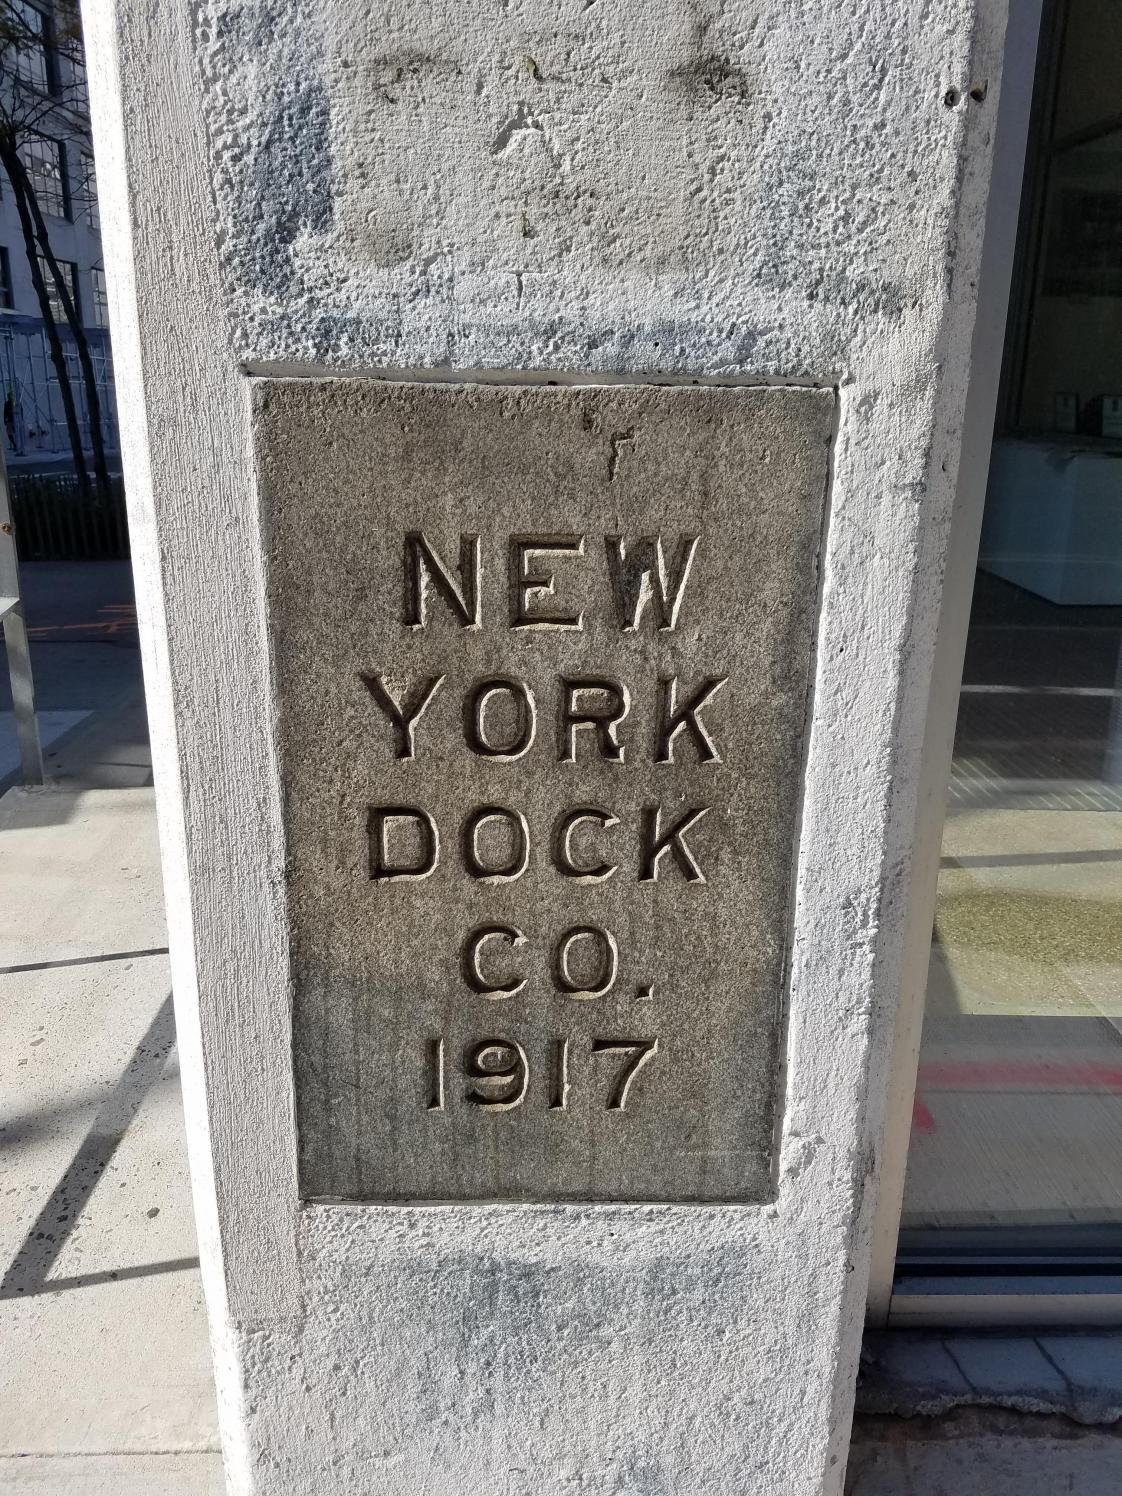 Concrete post with plaque that says "New York Dock co. 1917"